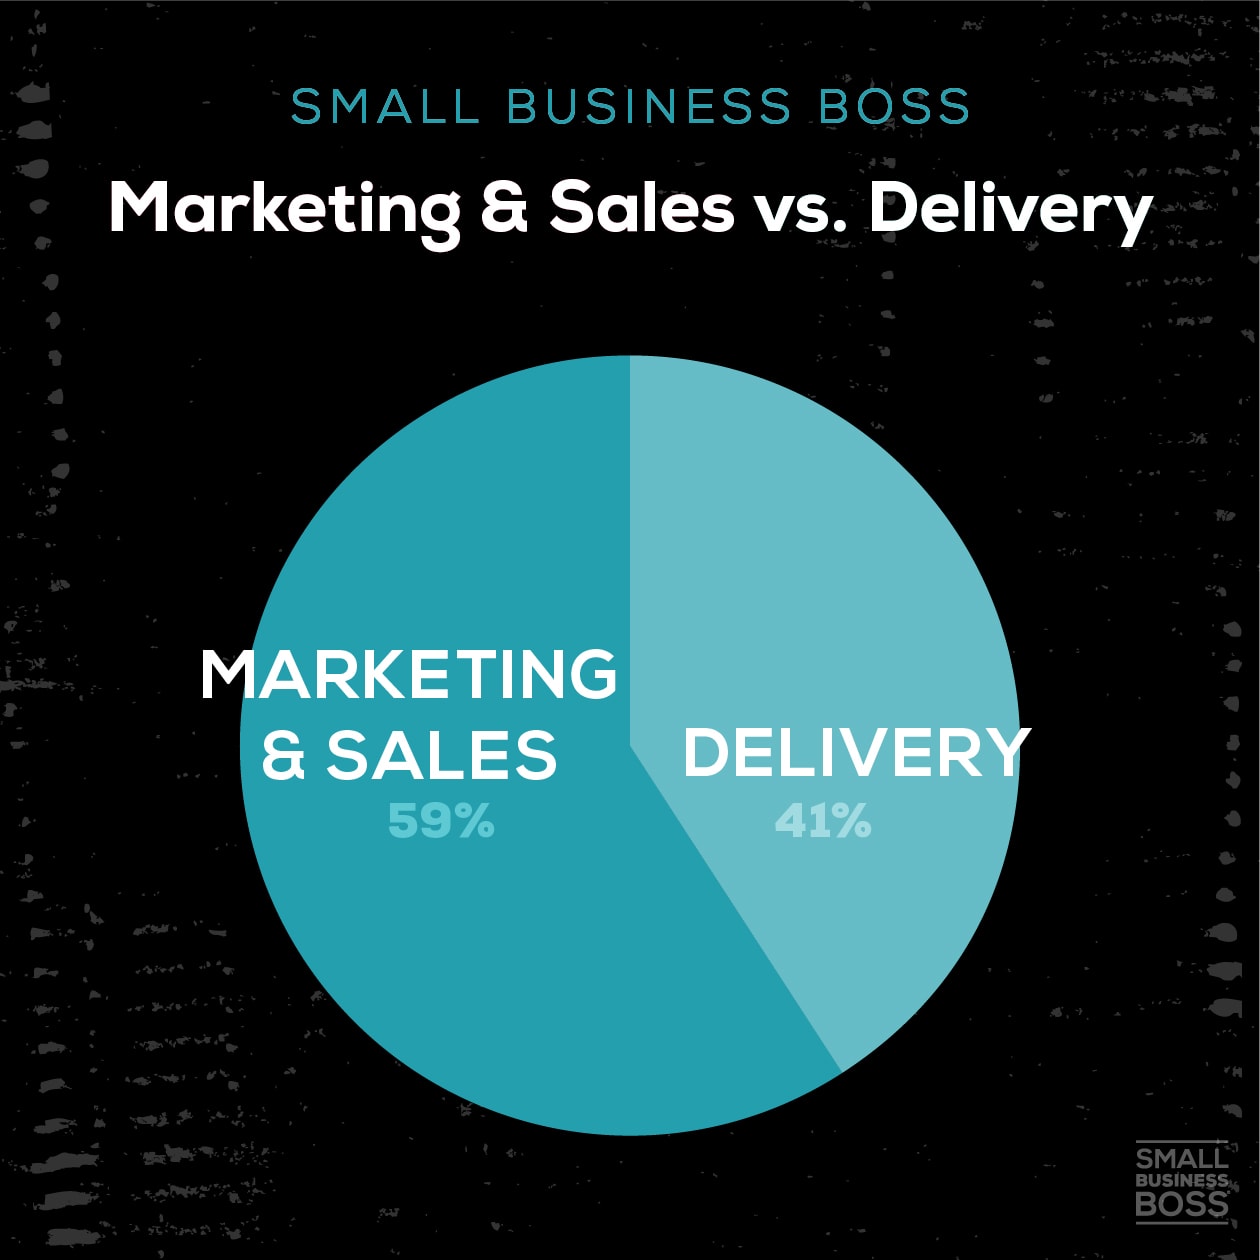 image of marketing and sales vs delivery pie chart